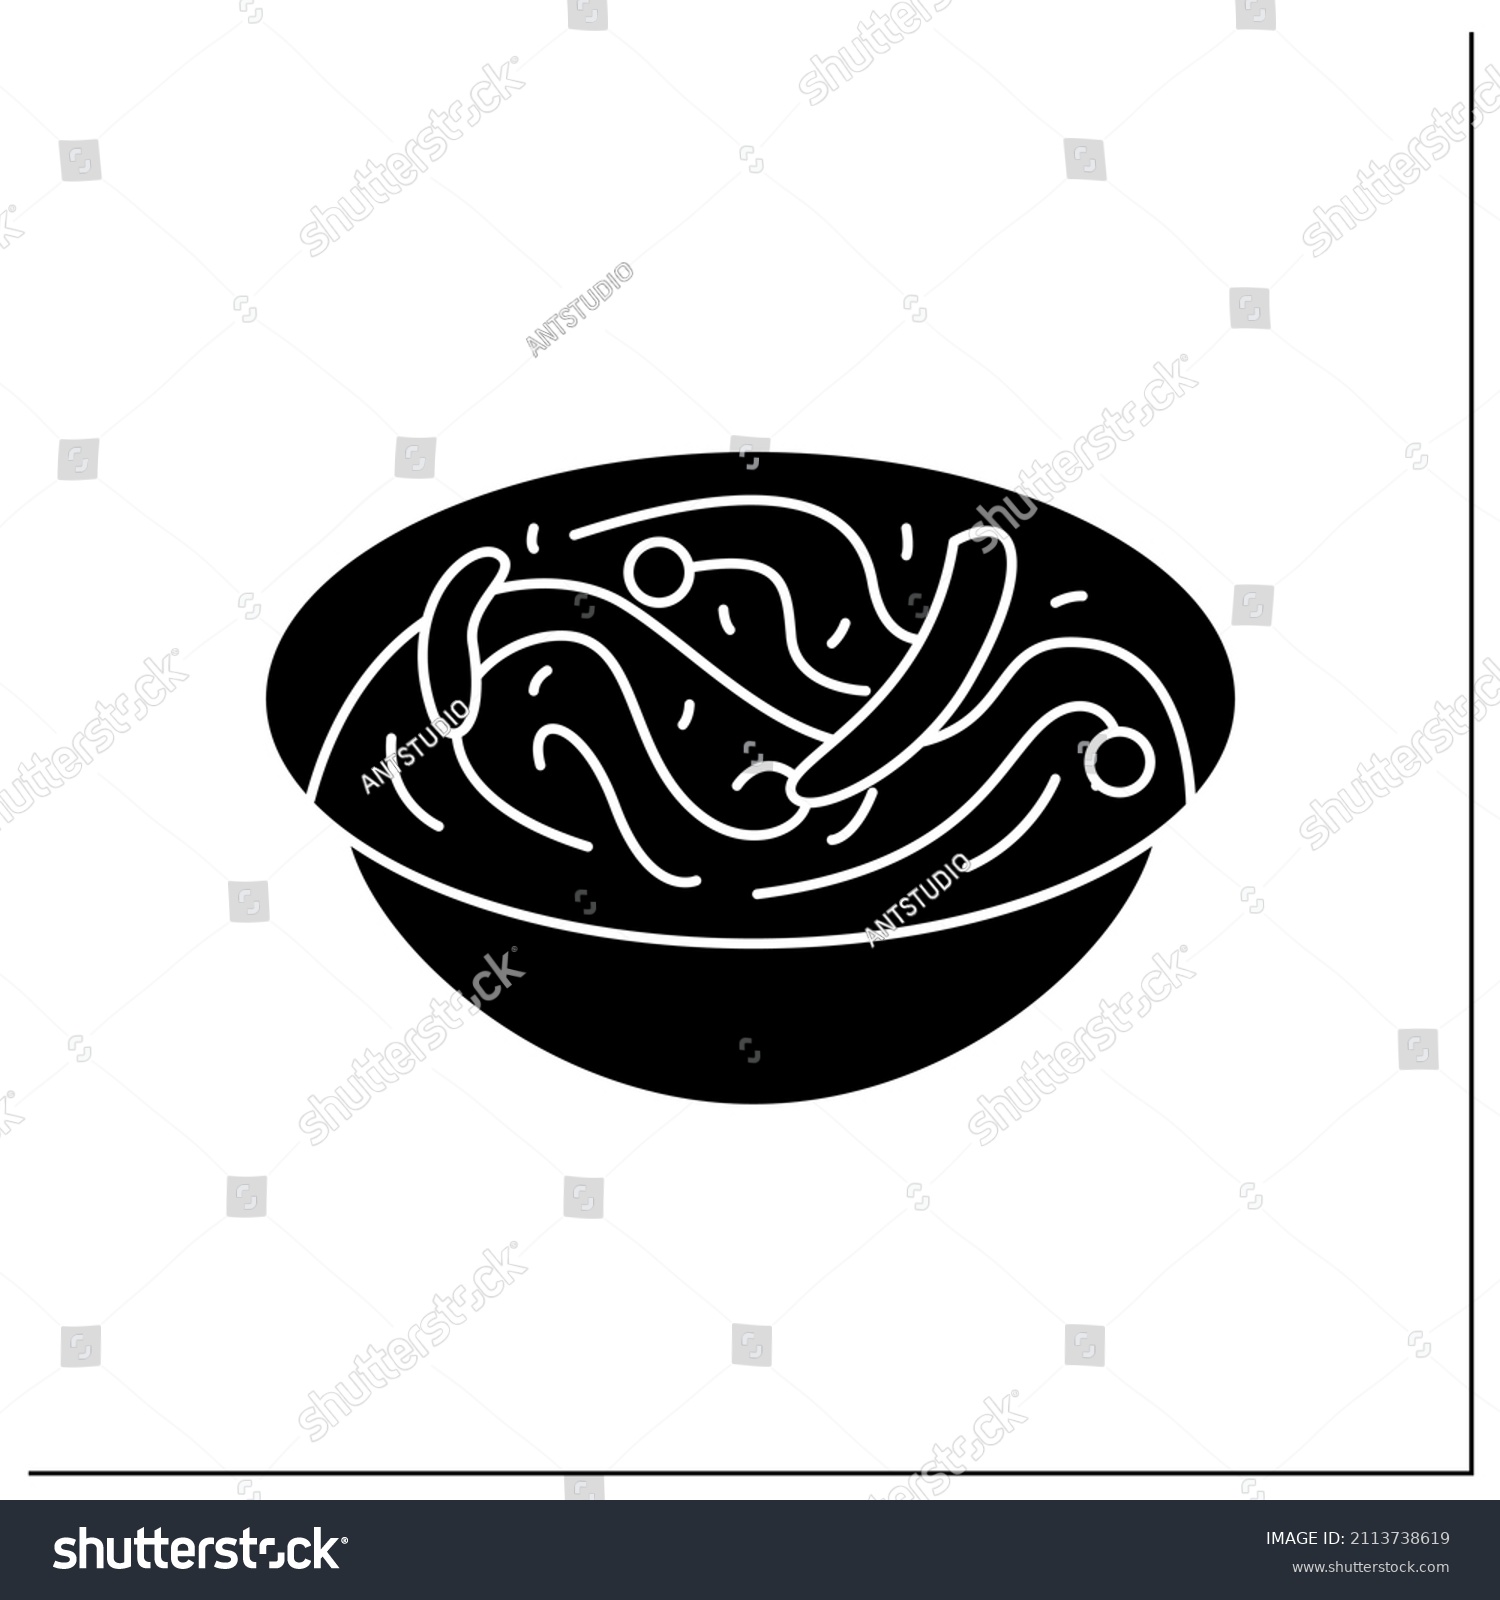 SVG of Chow mein glyph icon. Chinese egg noodles bowl with vegetables or meat.Tasty and easy wok or pan fried Asian food recipe for family dinner. Filled flat sign. Isolated silhouette vector illustration svg